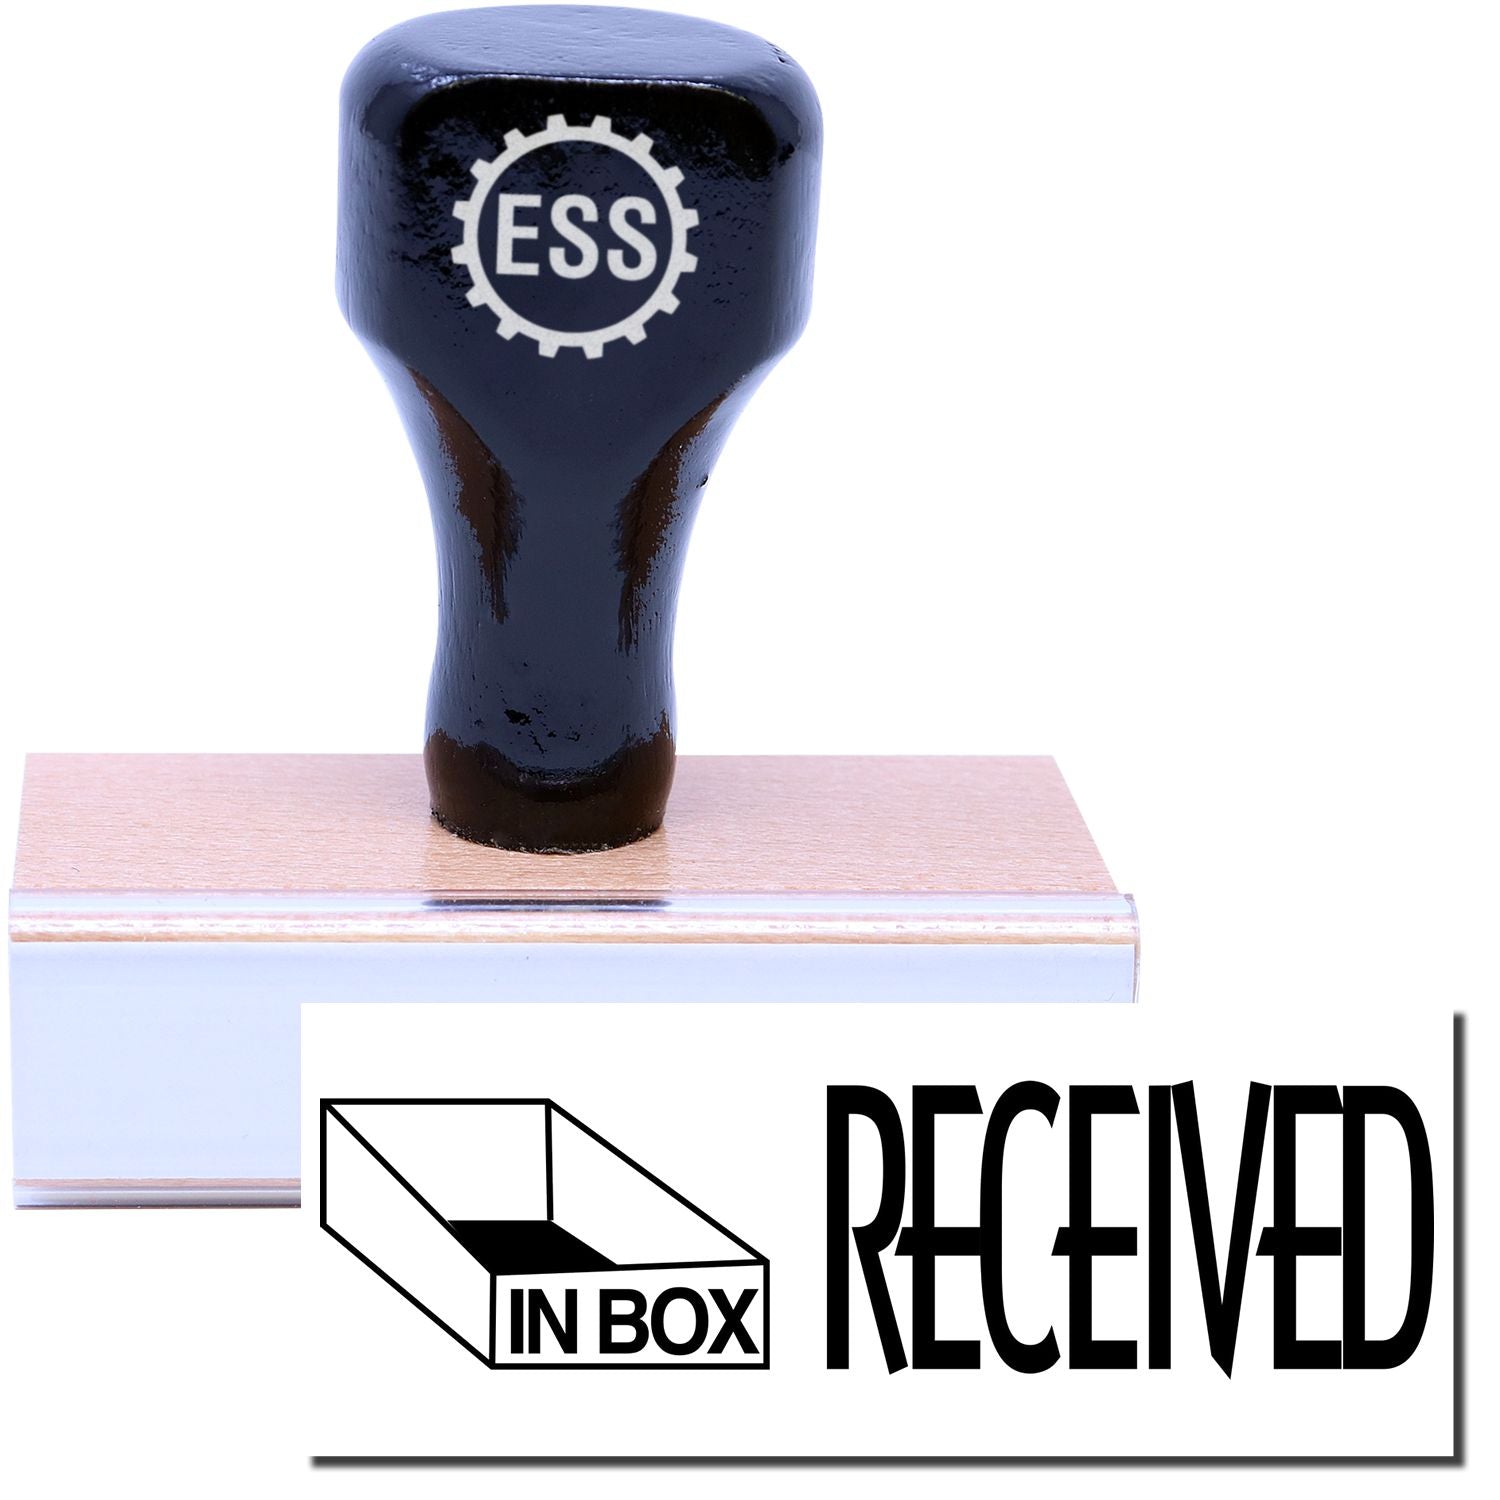 A stock office rubber stamp with a stamped image showing how the text "RECEIVED" in a large font with an In Box icon on the left side is displayed after stamping.